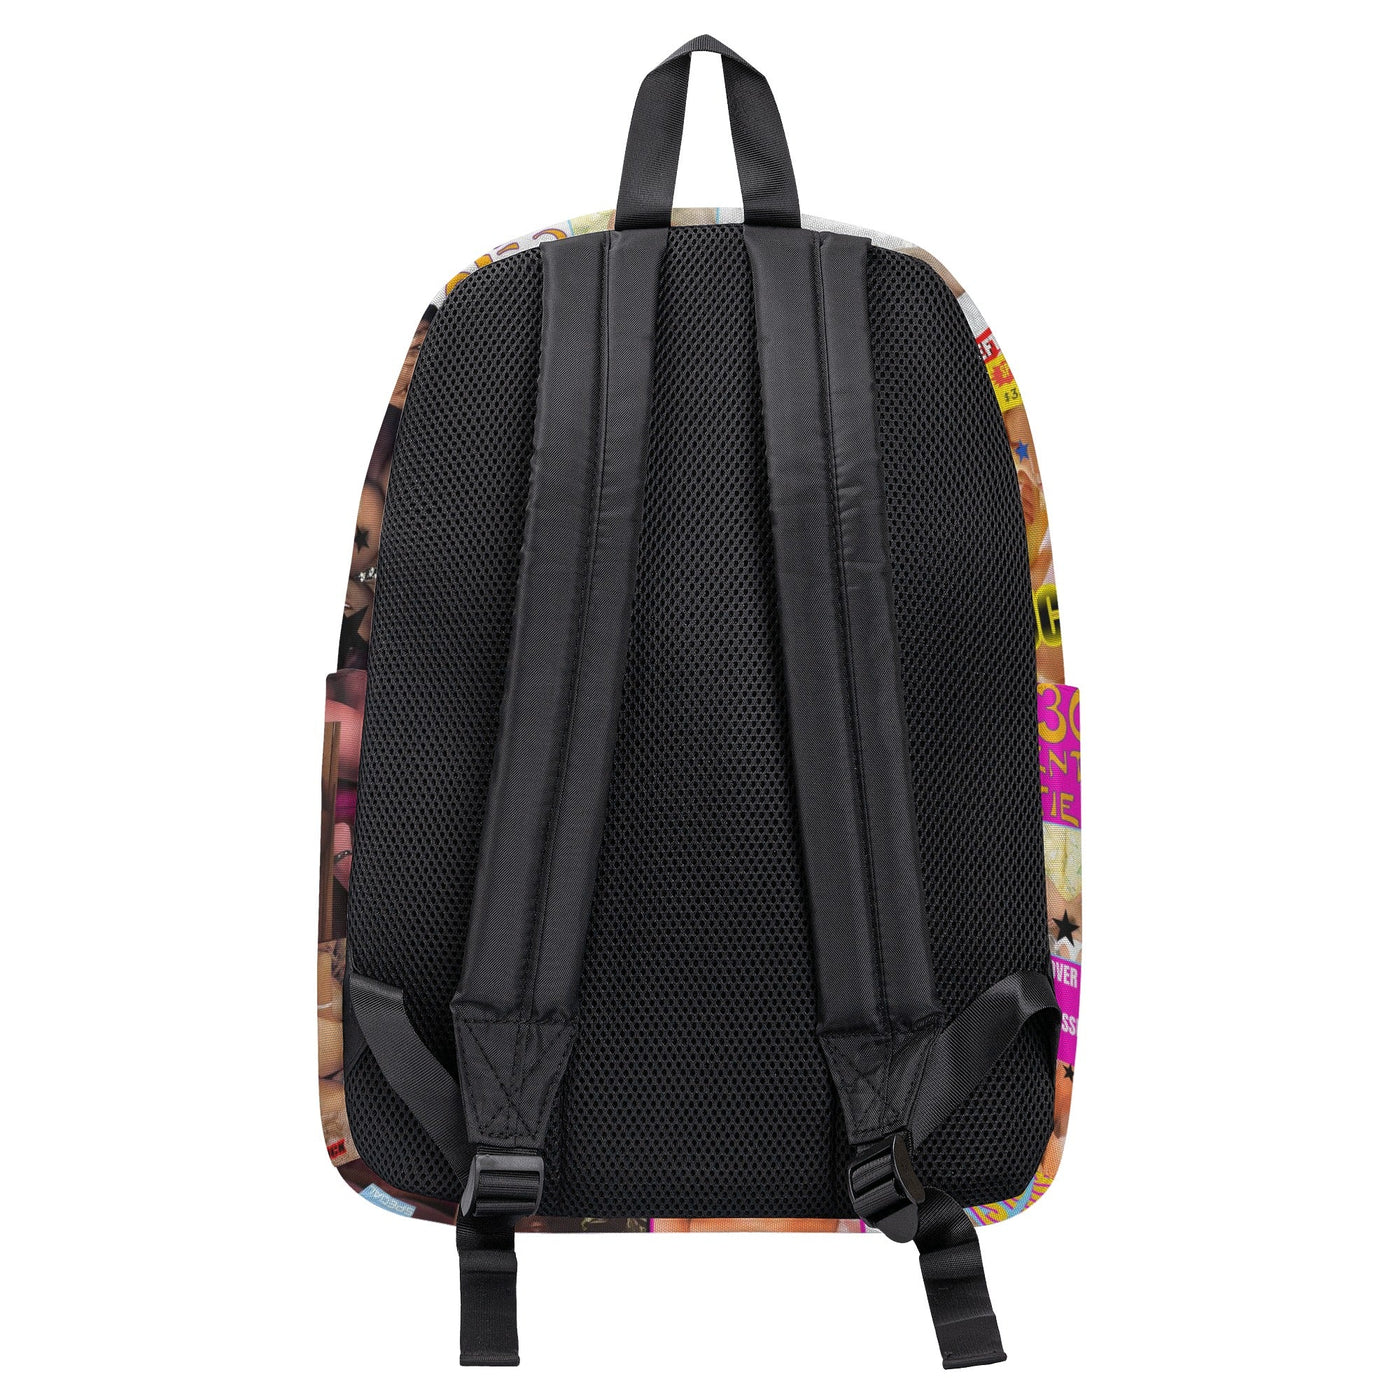 Tyler Durden Black Sugar Soft Backpack - Inspired by Fight Club